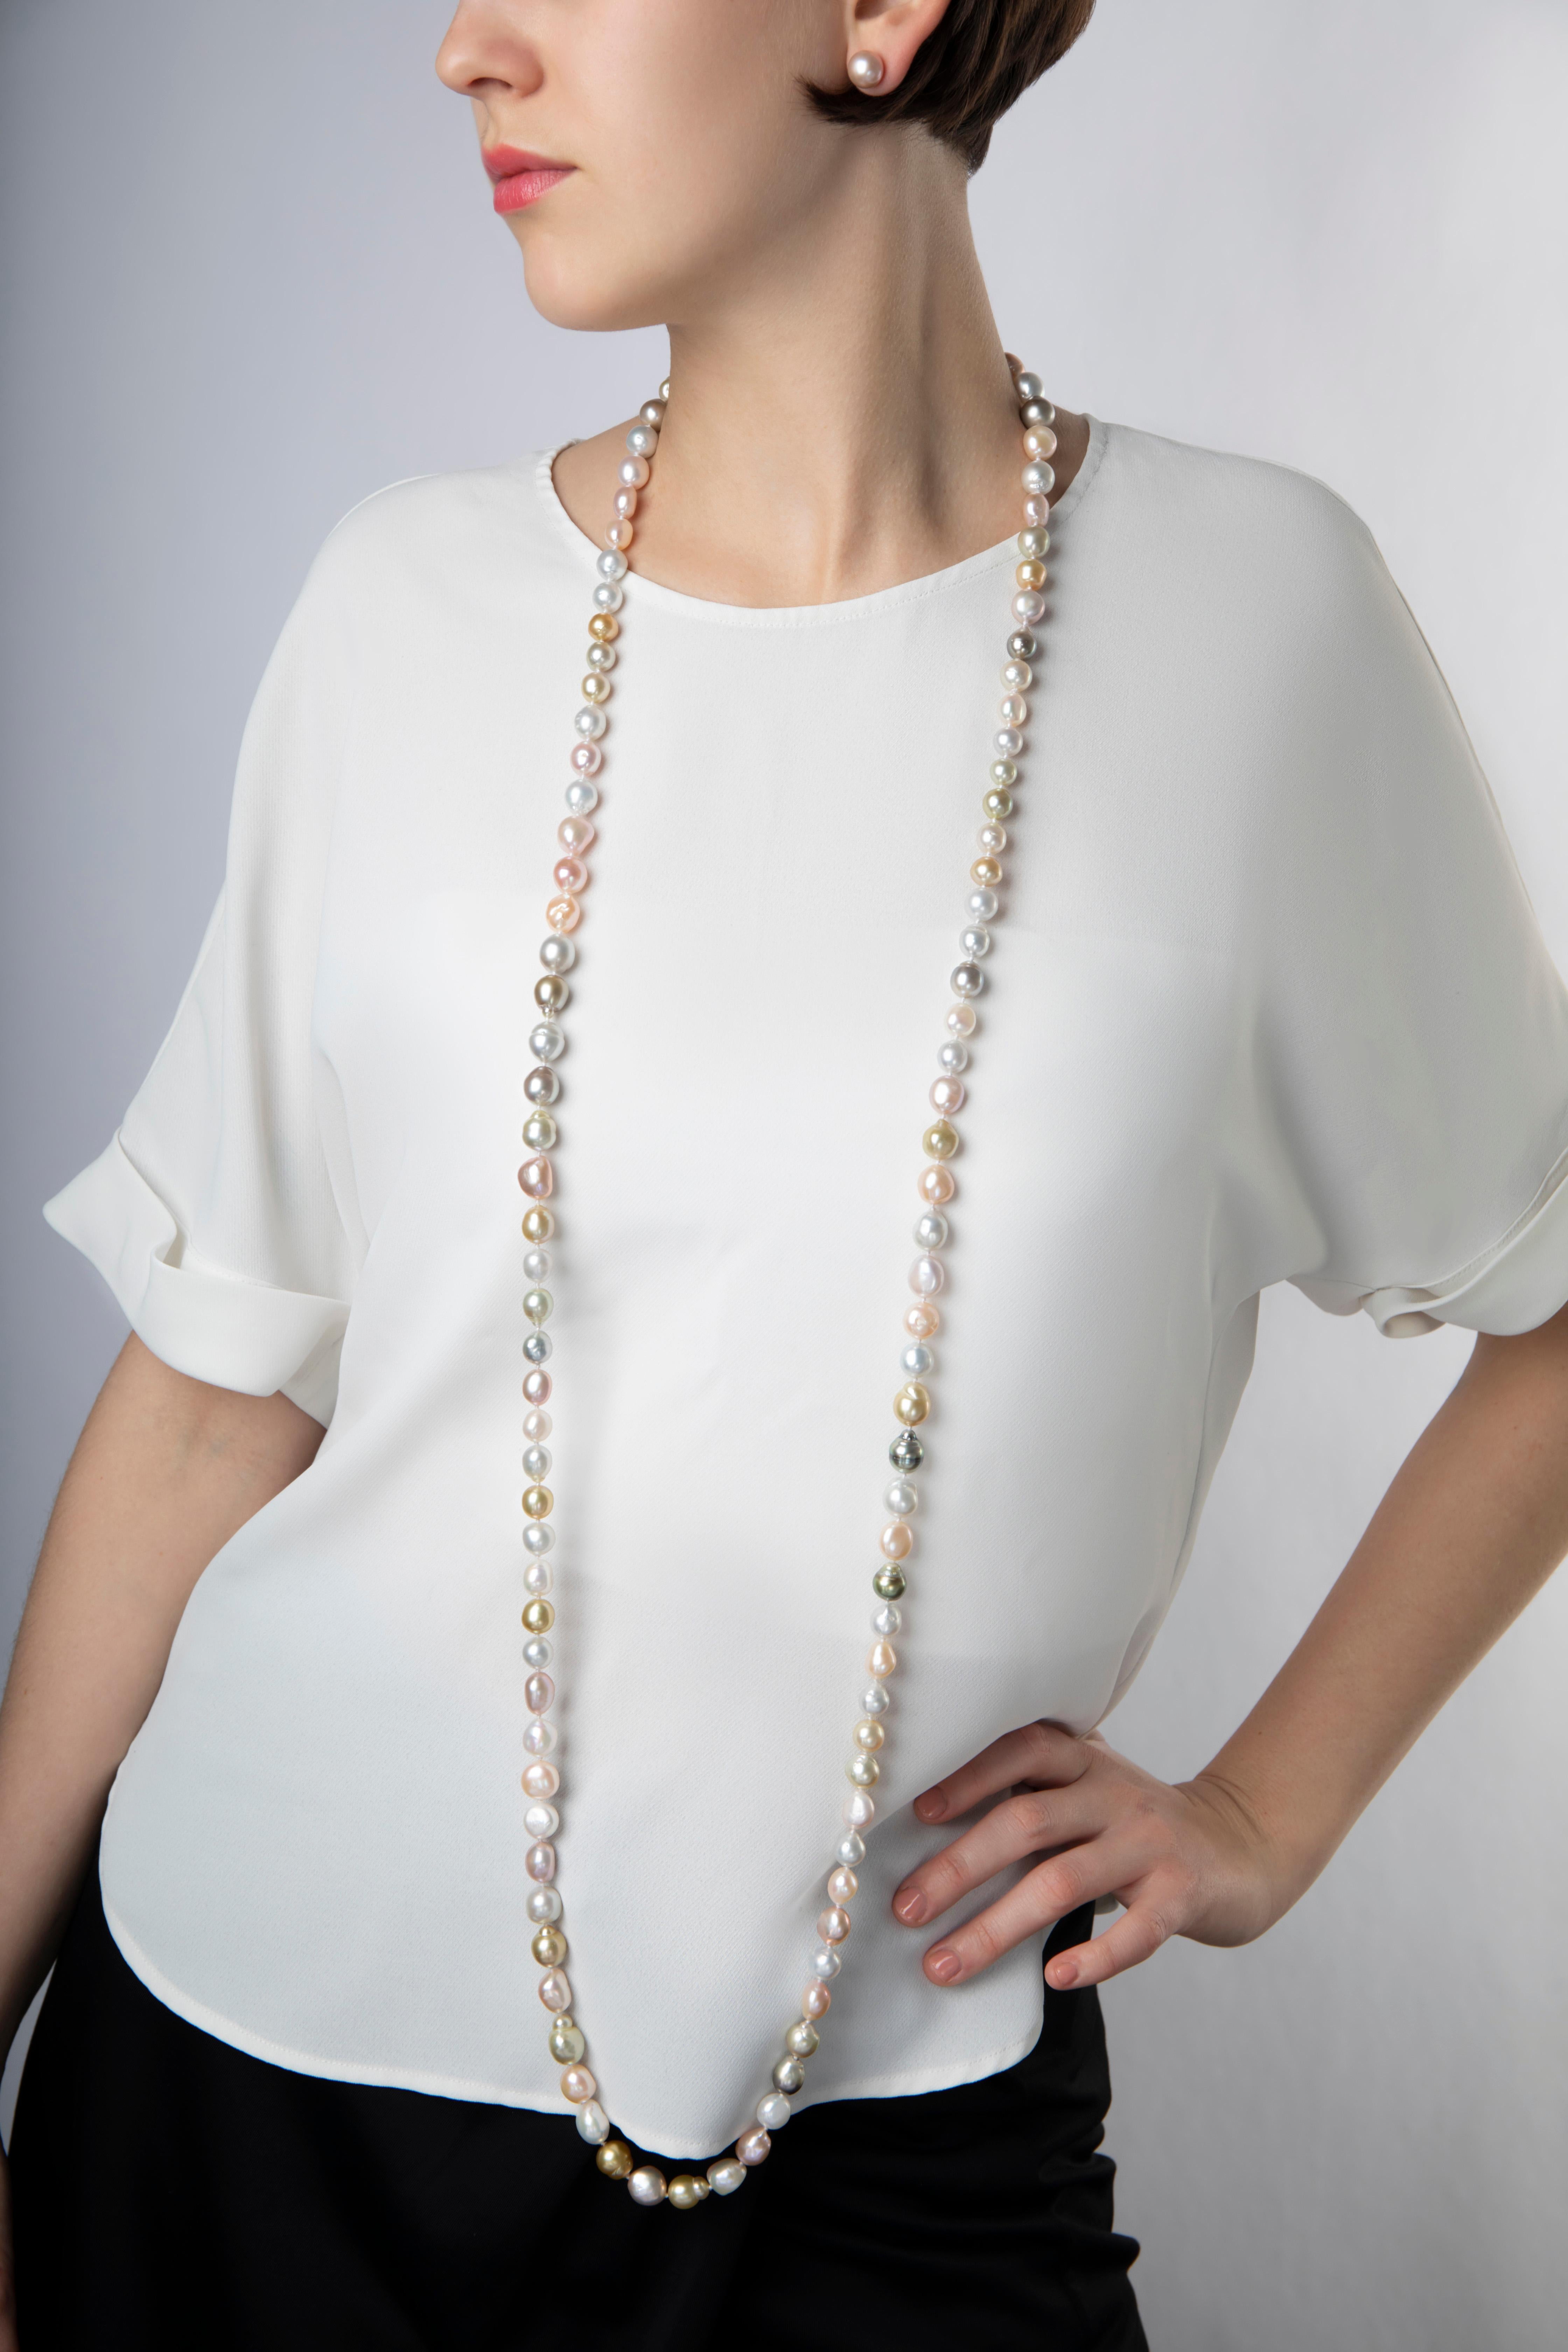 Round Cut Yoko London Multicolored Baroque Pearl Rope Necklace For Sale